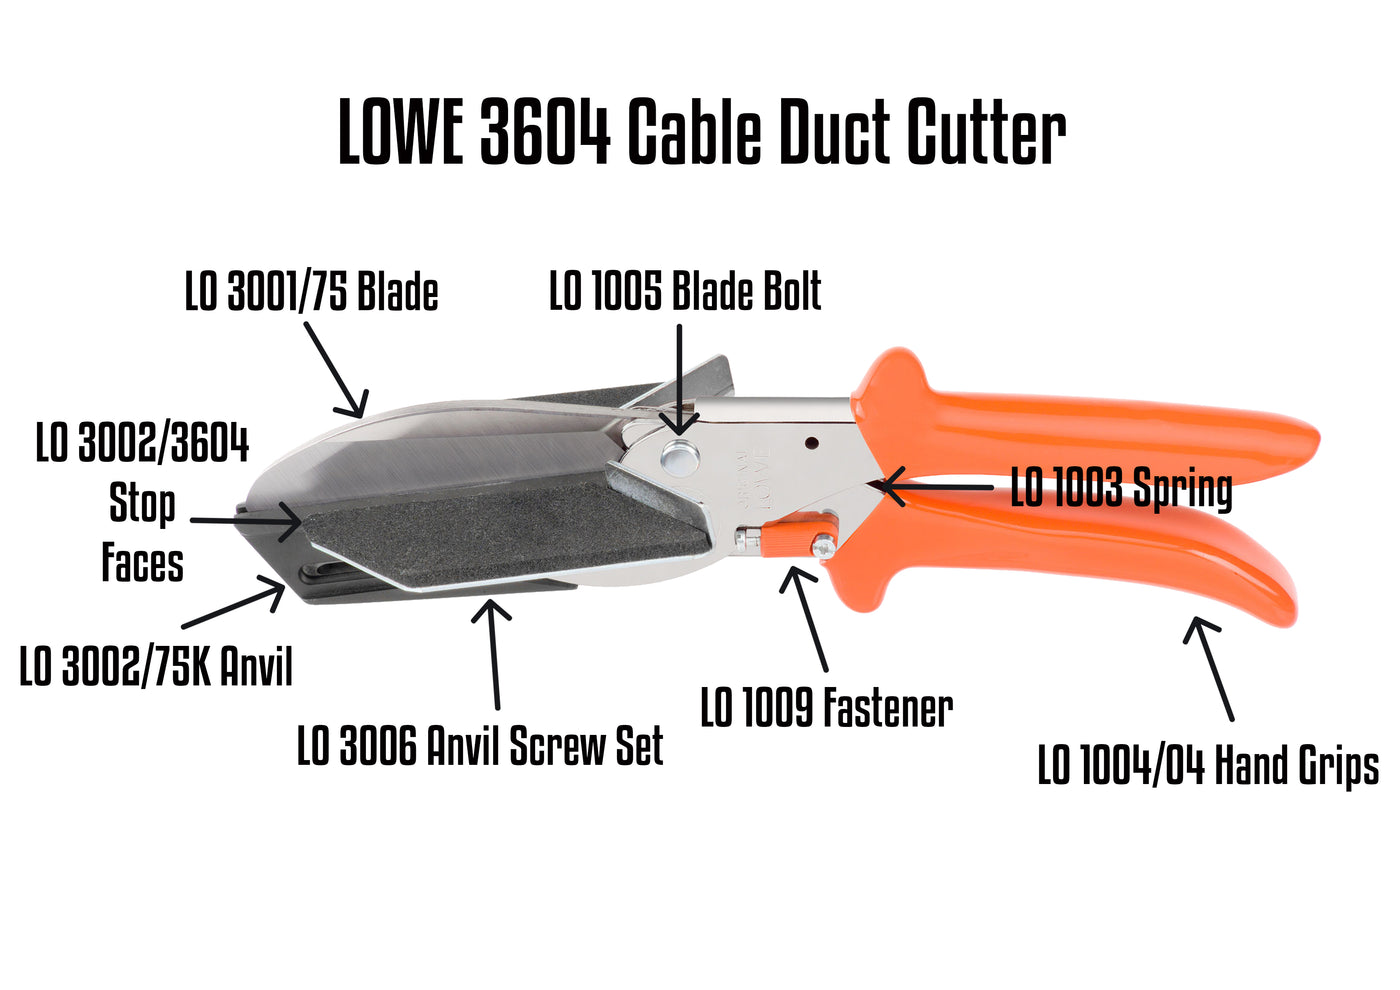 LO 3604 Cable Duct Cutter Parts Guide